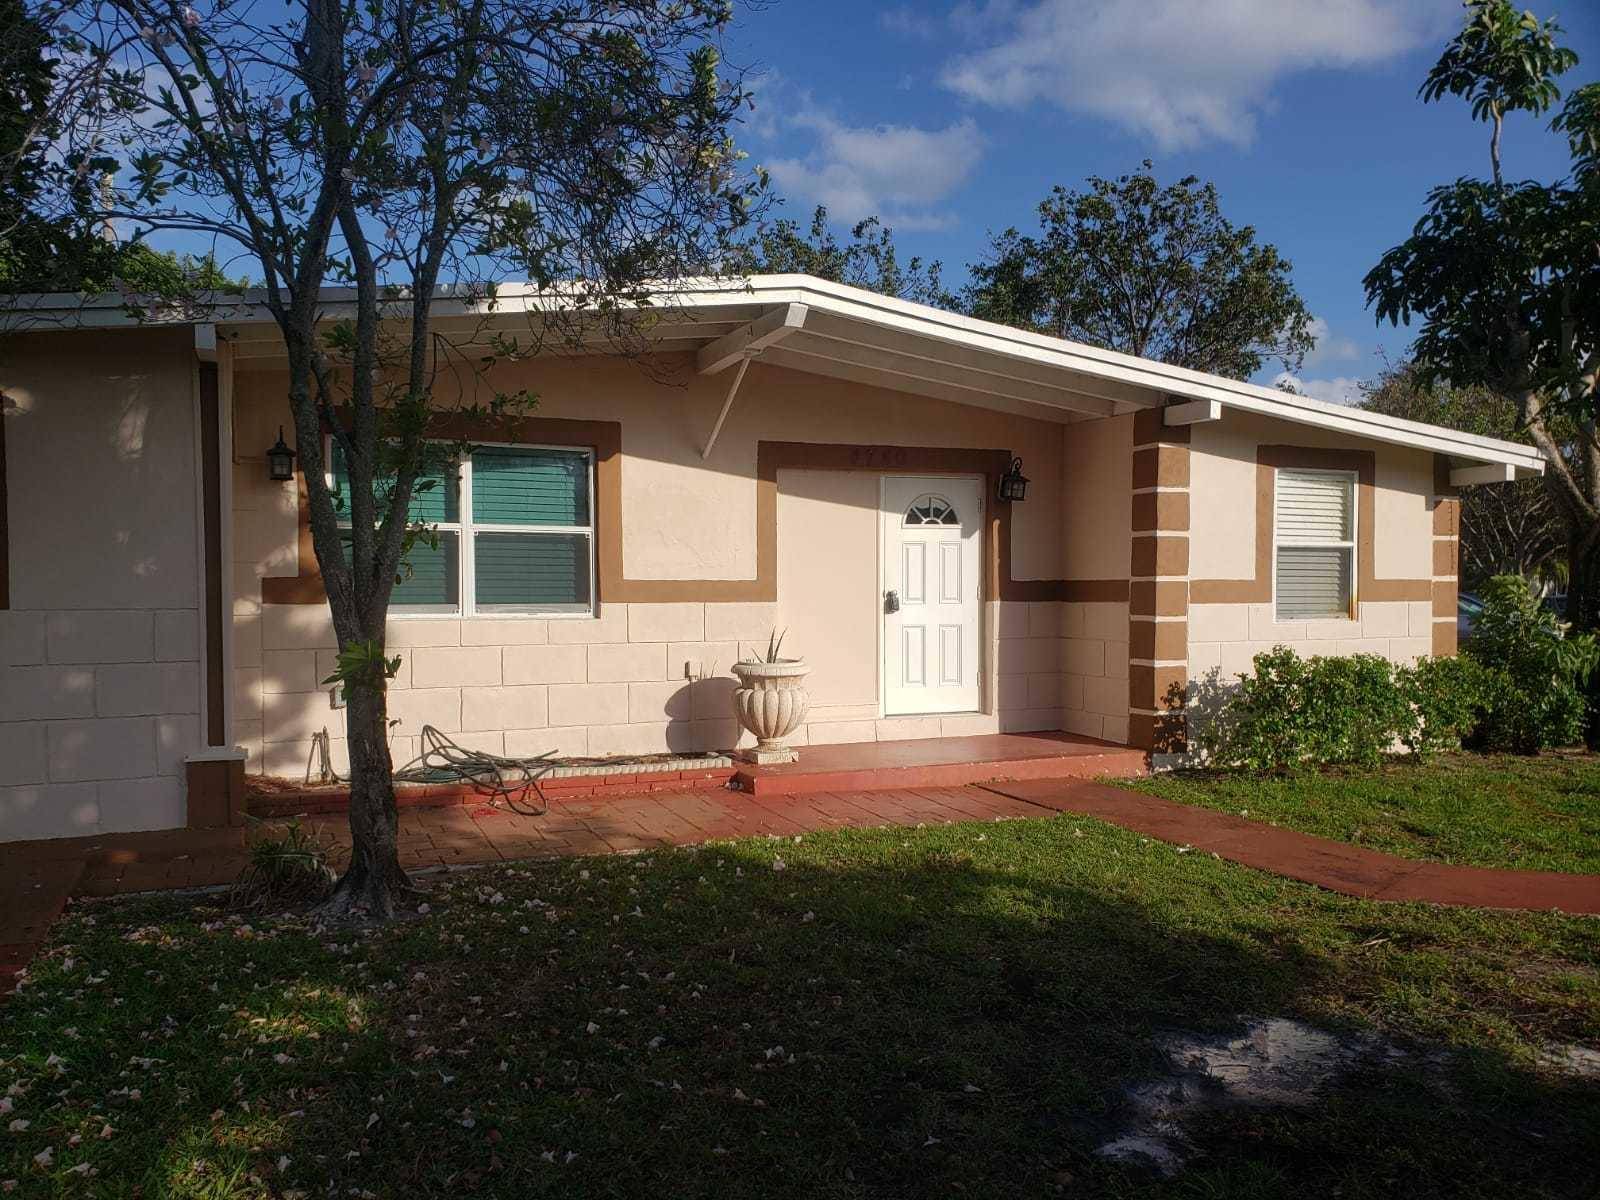 Beautifully renovated home situated on a corner lot in the most desirable area of Pompano Beach.